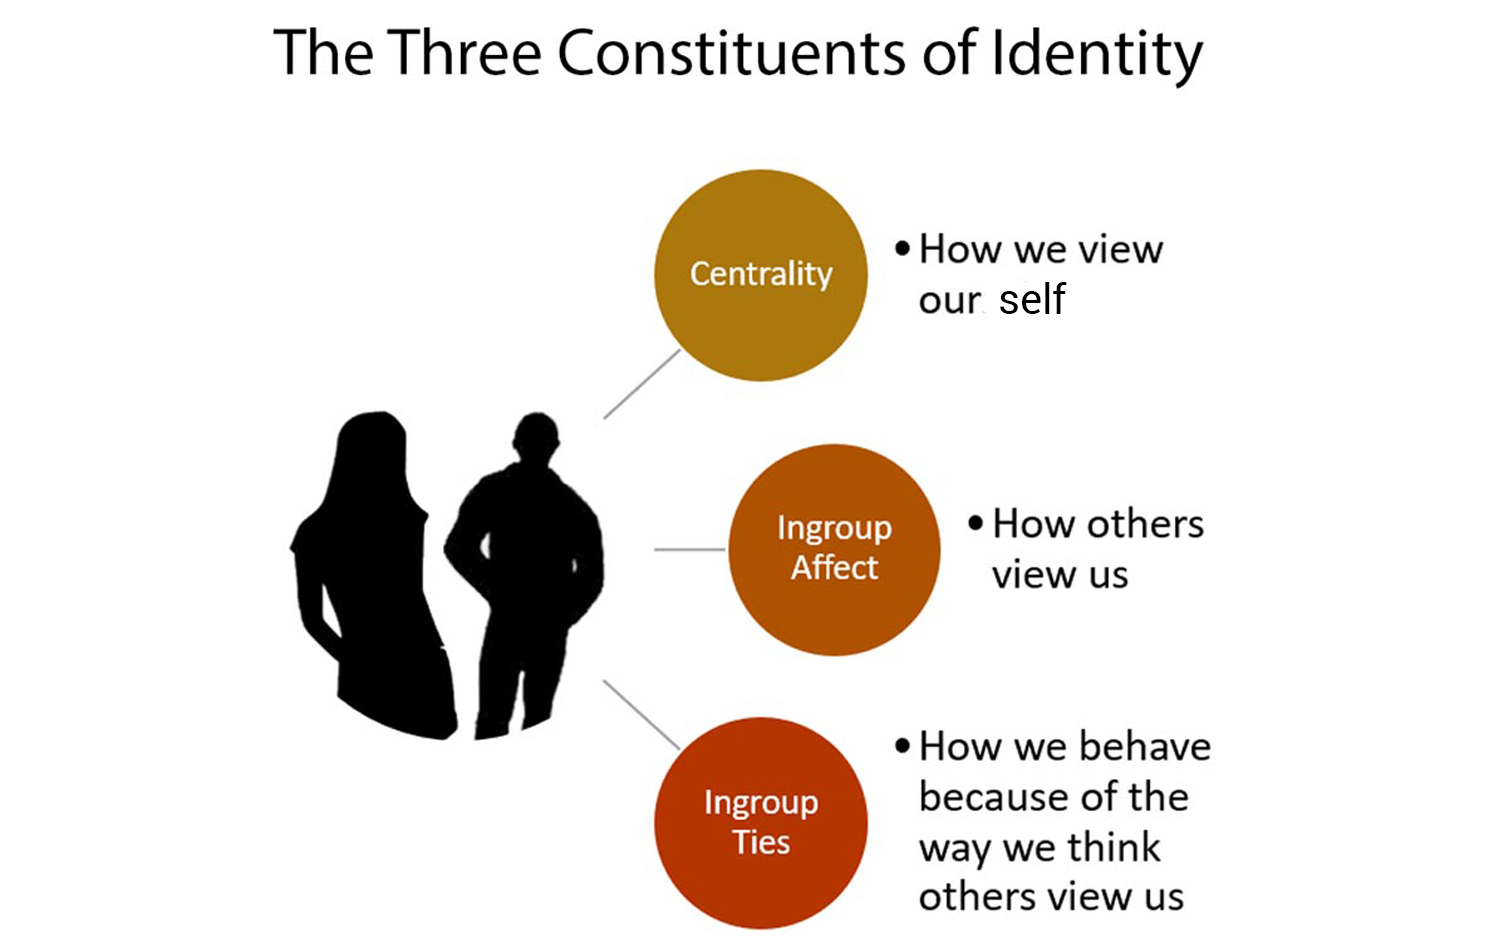 Illustration from: Intentional: How to Live, Love, Work and Play Meaningfully - The Three Constituents of Identity

* How we view
our self

 

Ingroup * How others
Affect view us

 

* How we behave
Ingroup because of the
LES way we think
others view us